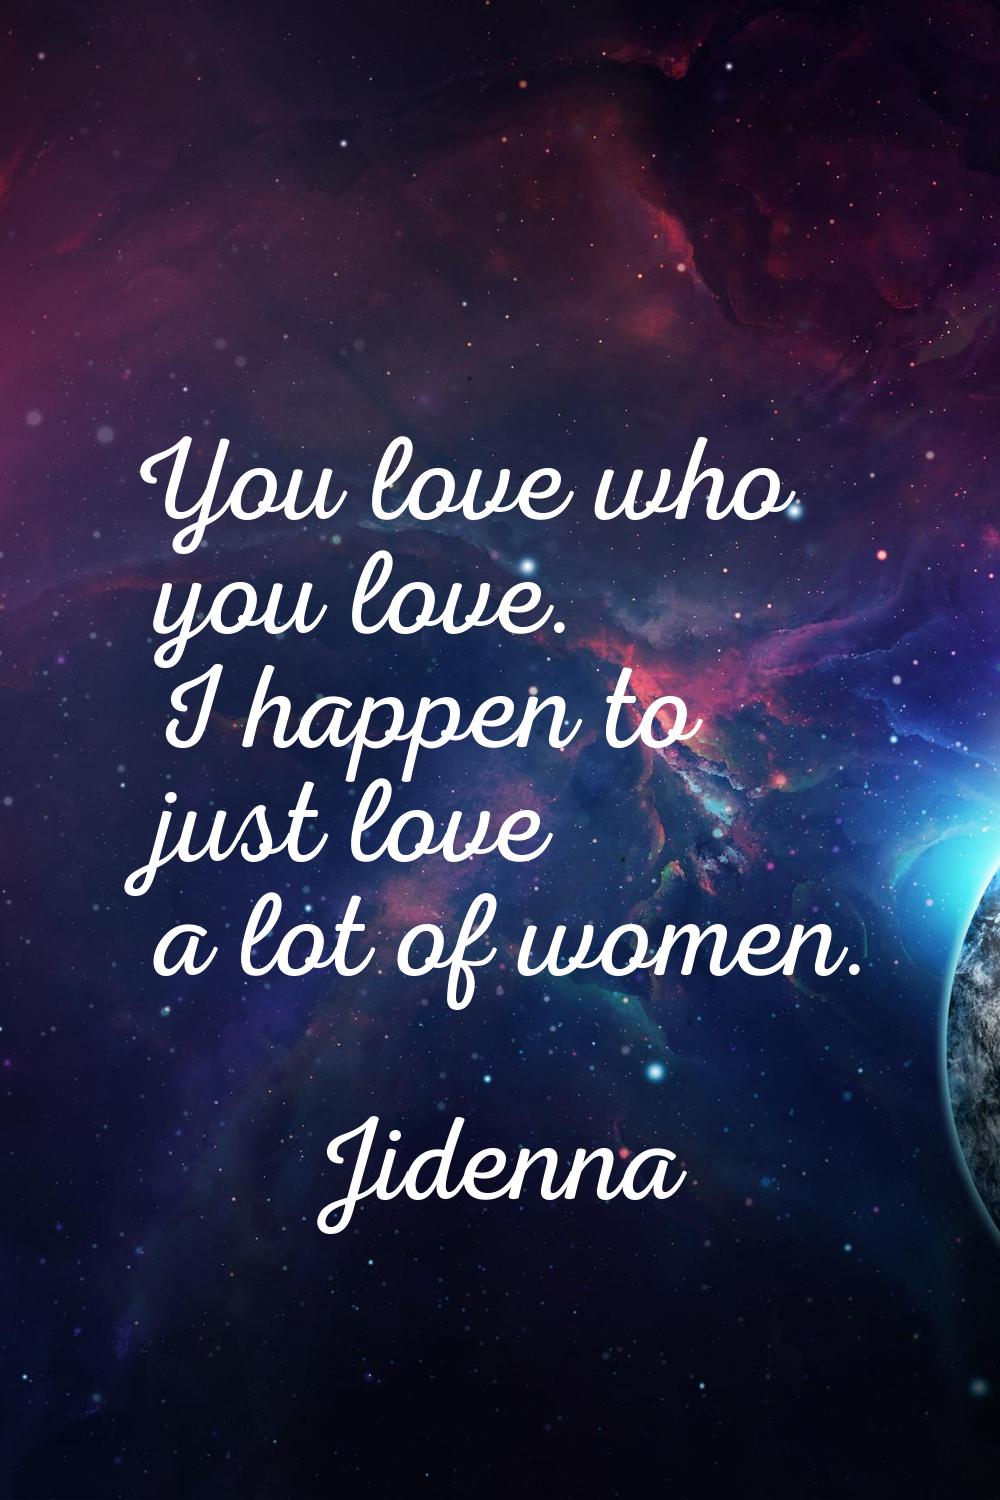 You love who you love. I happen to just love a lot of women.